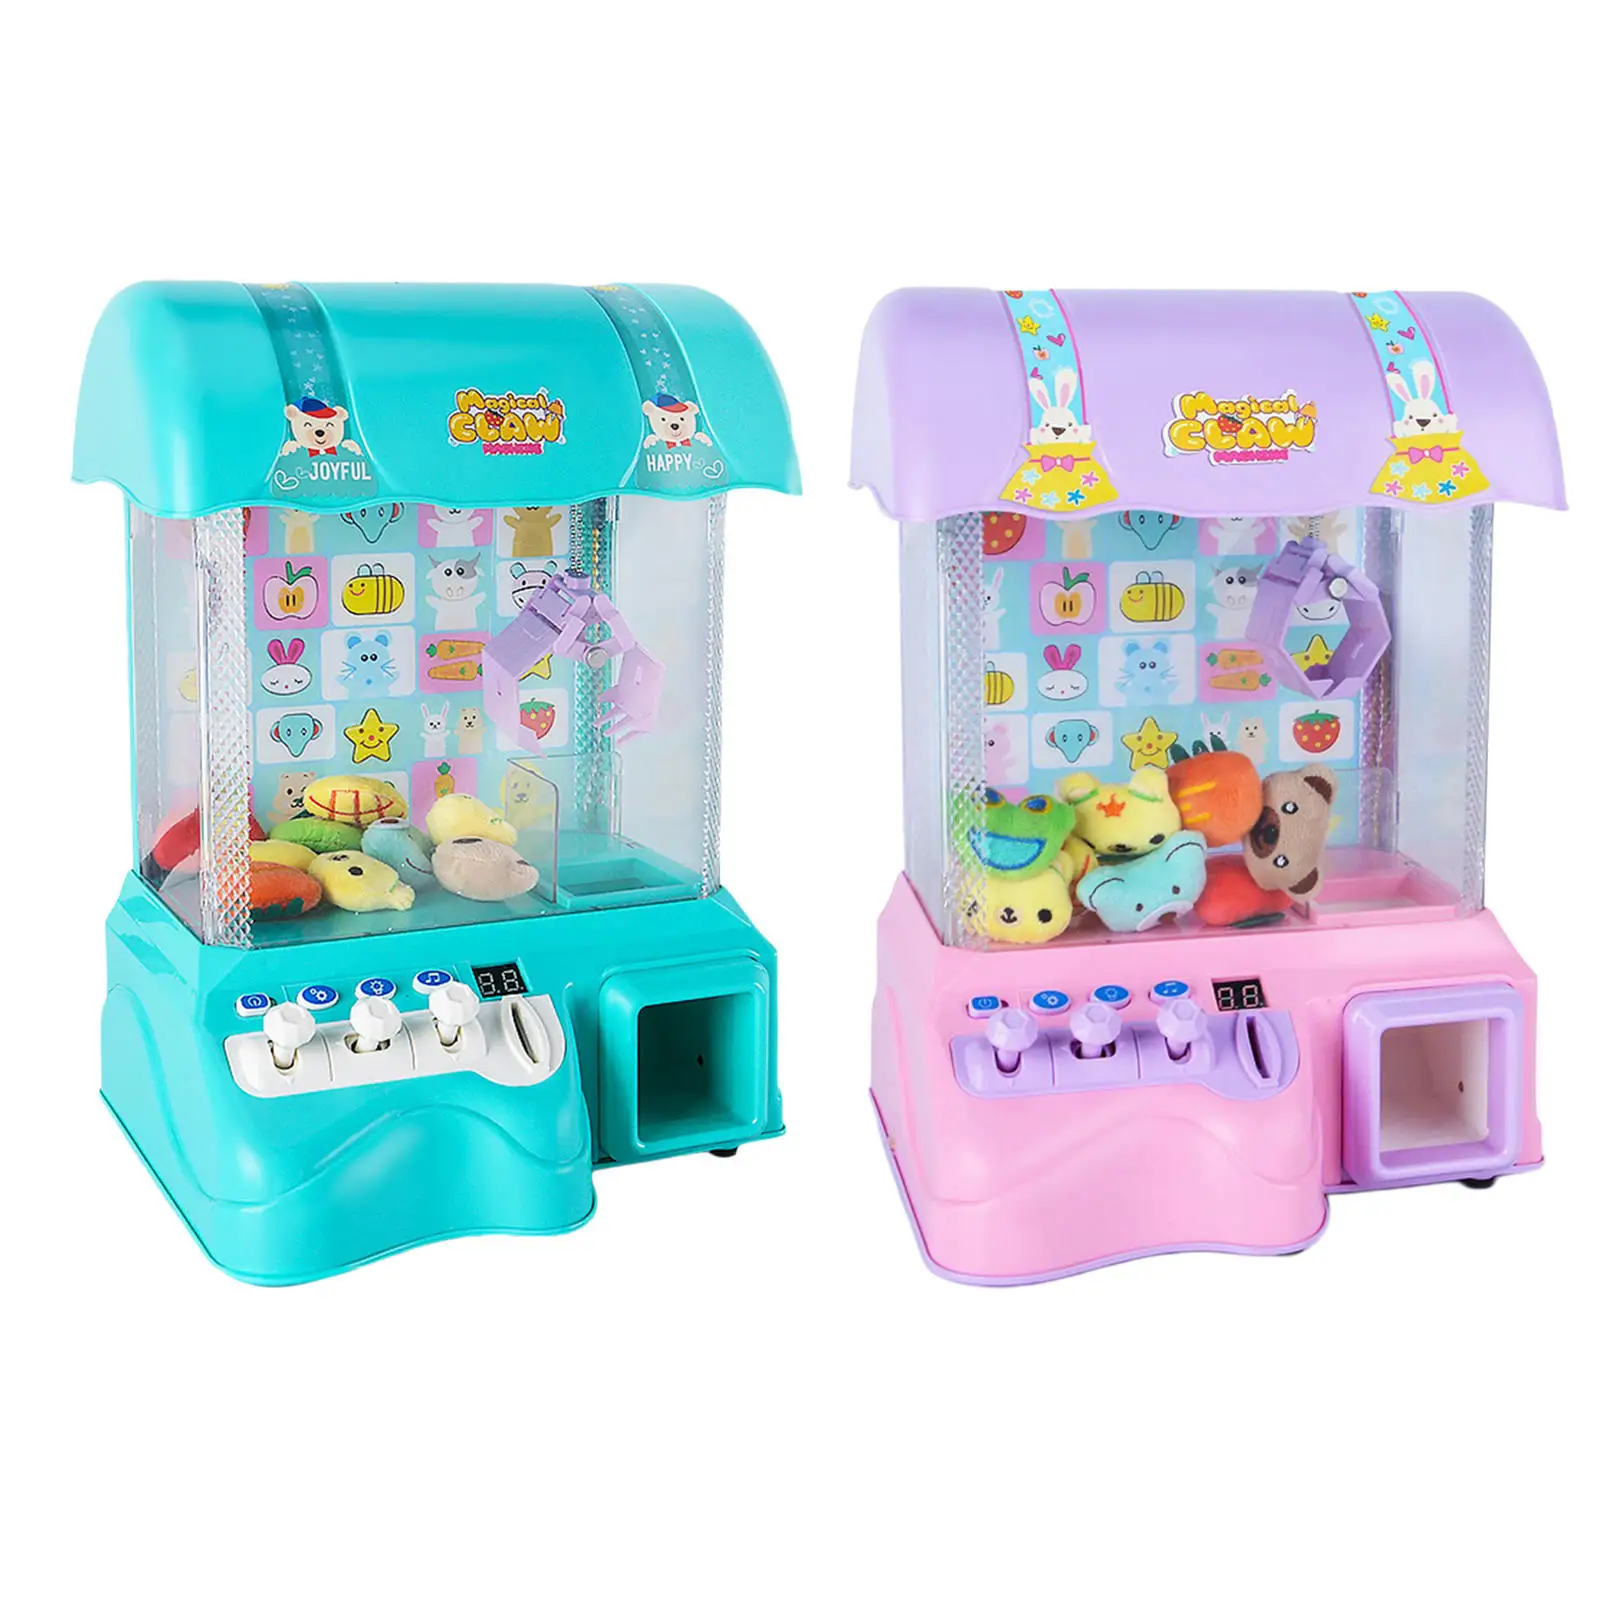 Mini Electric Claw Machine Fun Play Coin Game Doll Machine Vending Grabber Catcher Toy Playset w/ Light & Sound Children Gifts